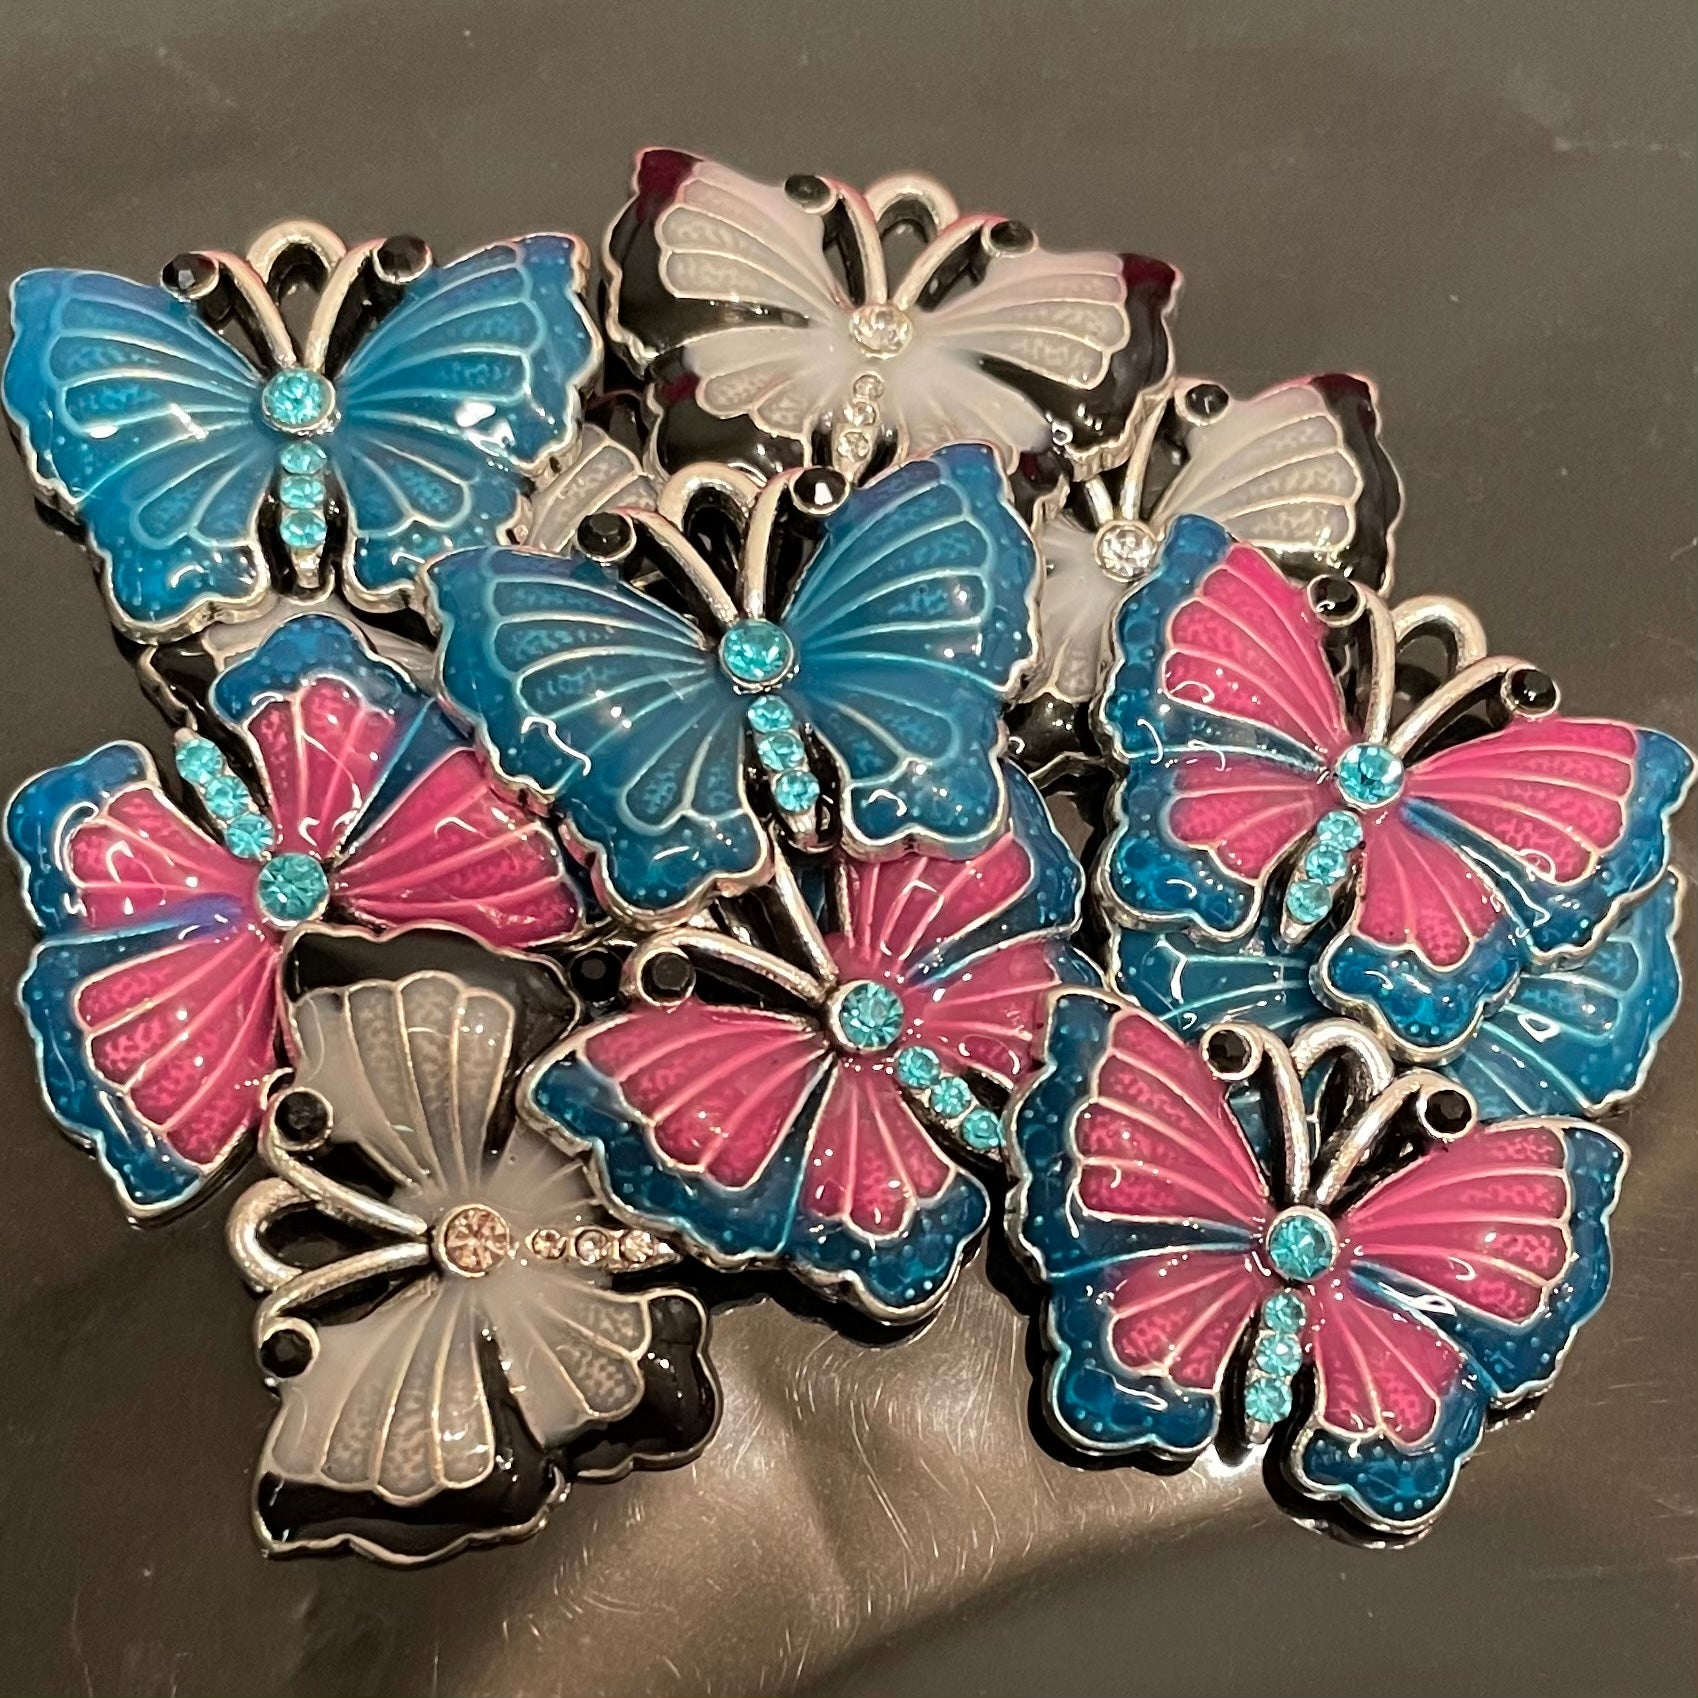 Large butterfly charms